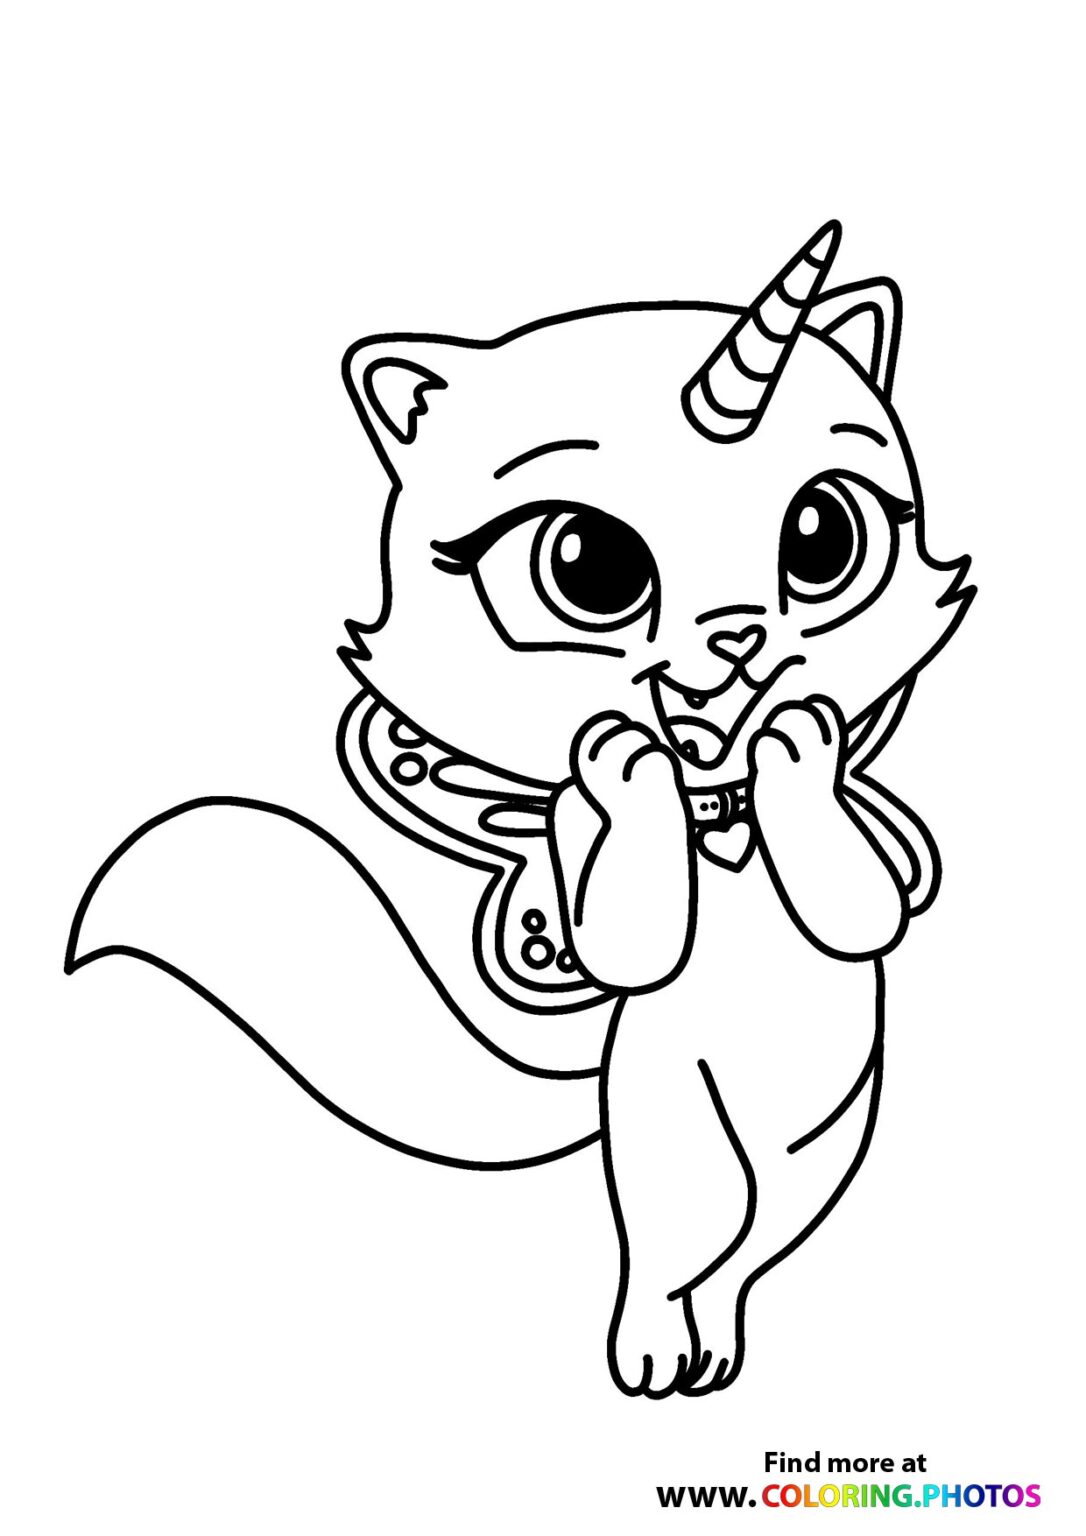 unicorn-cat-coloring-pages-coloring-pages-for-kids-and-adults-unicorn-cat-coloring-pages